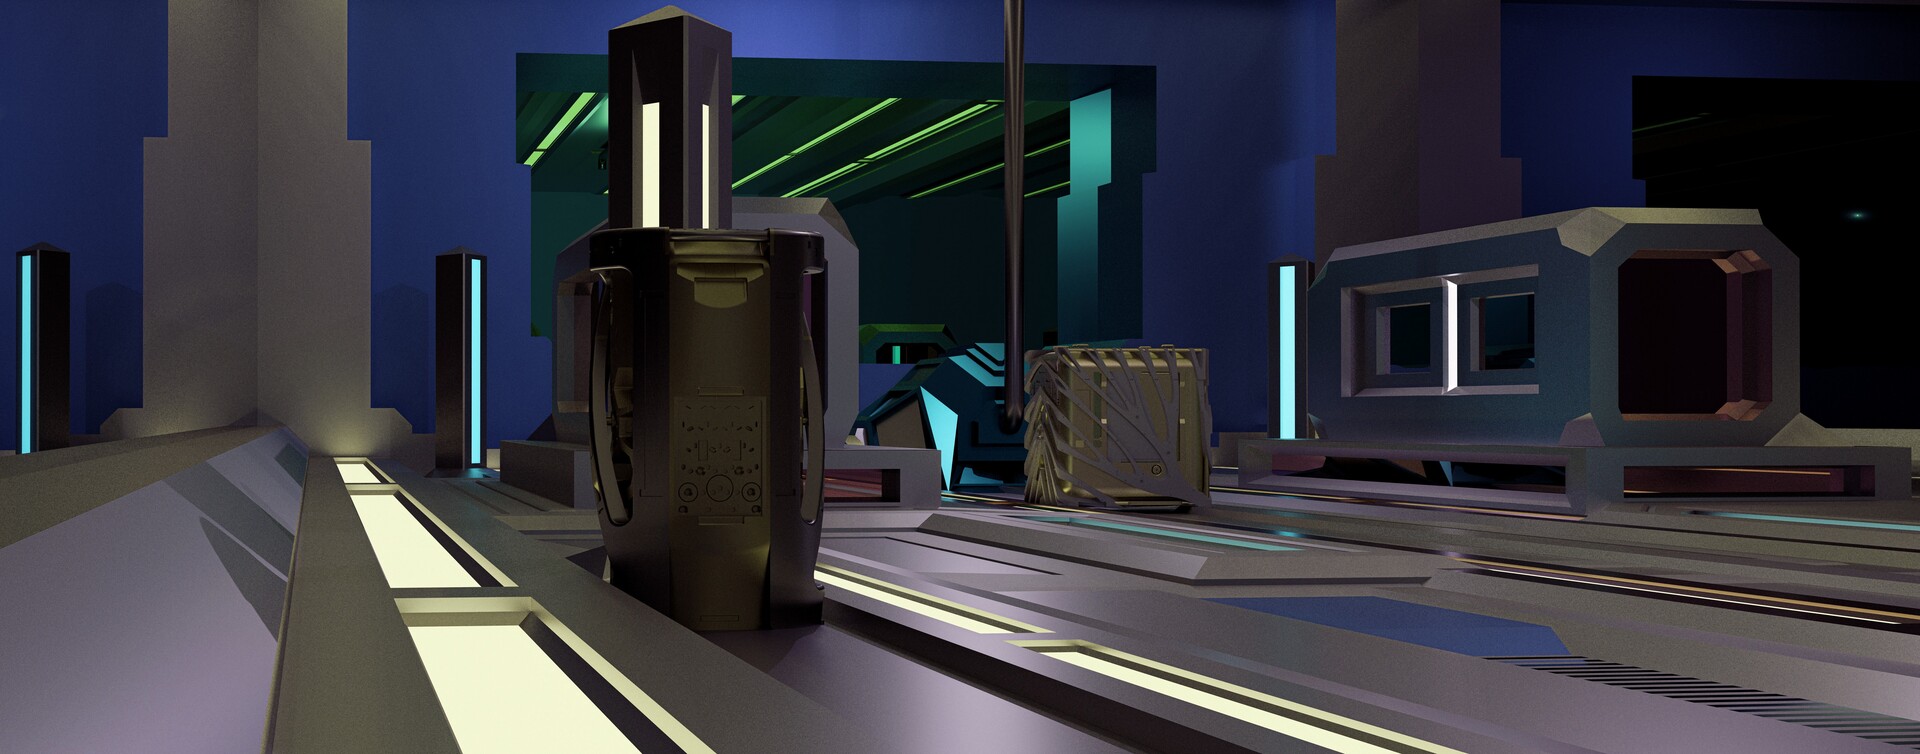 Industrial Inisthereal Celestiod Test Scifi cylindroid prototest mirrornetheridustrial Visualiser